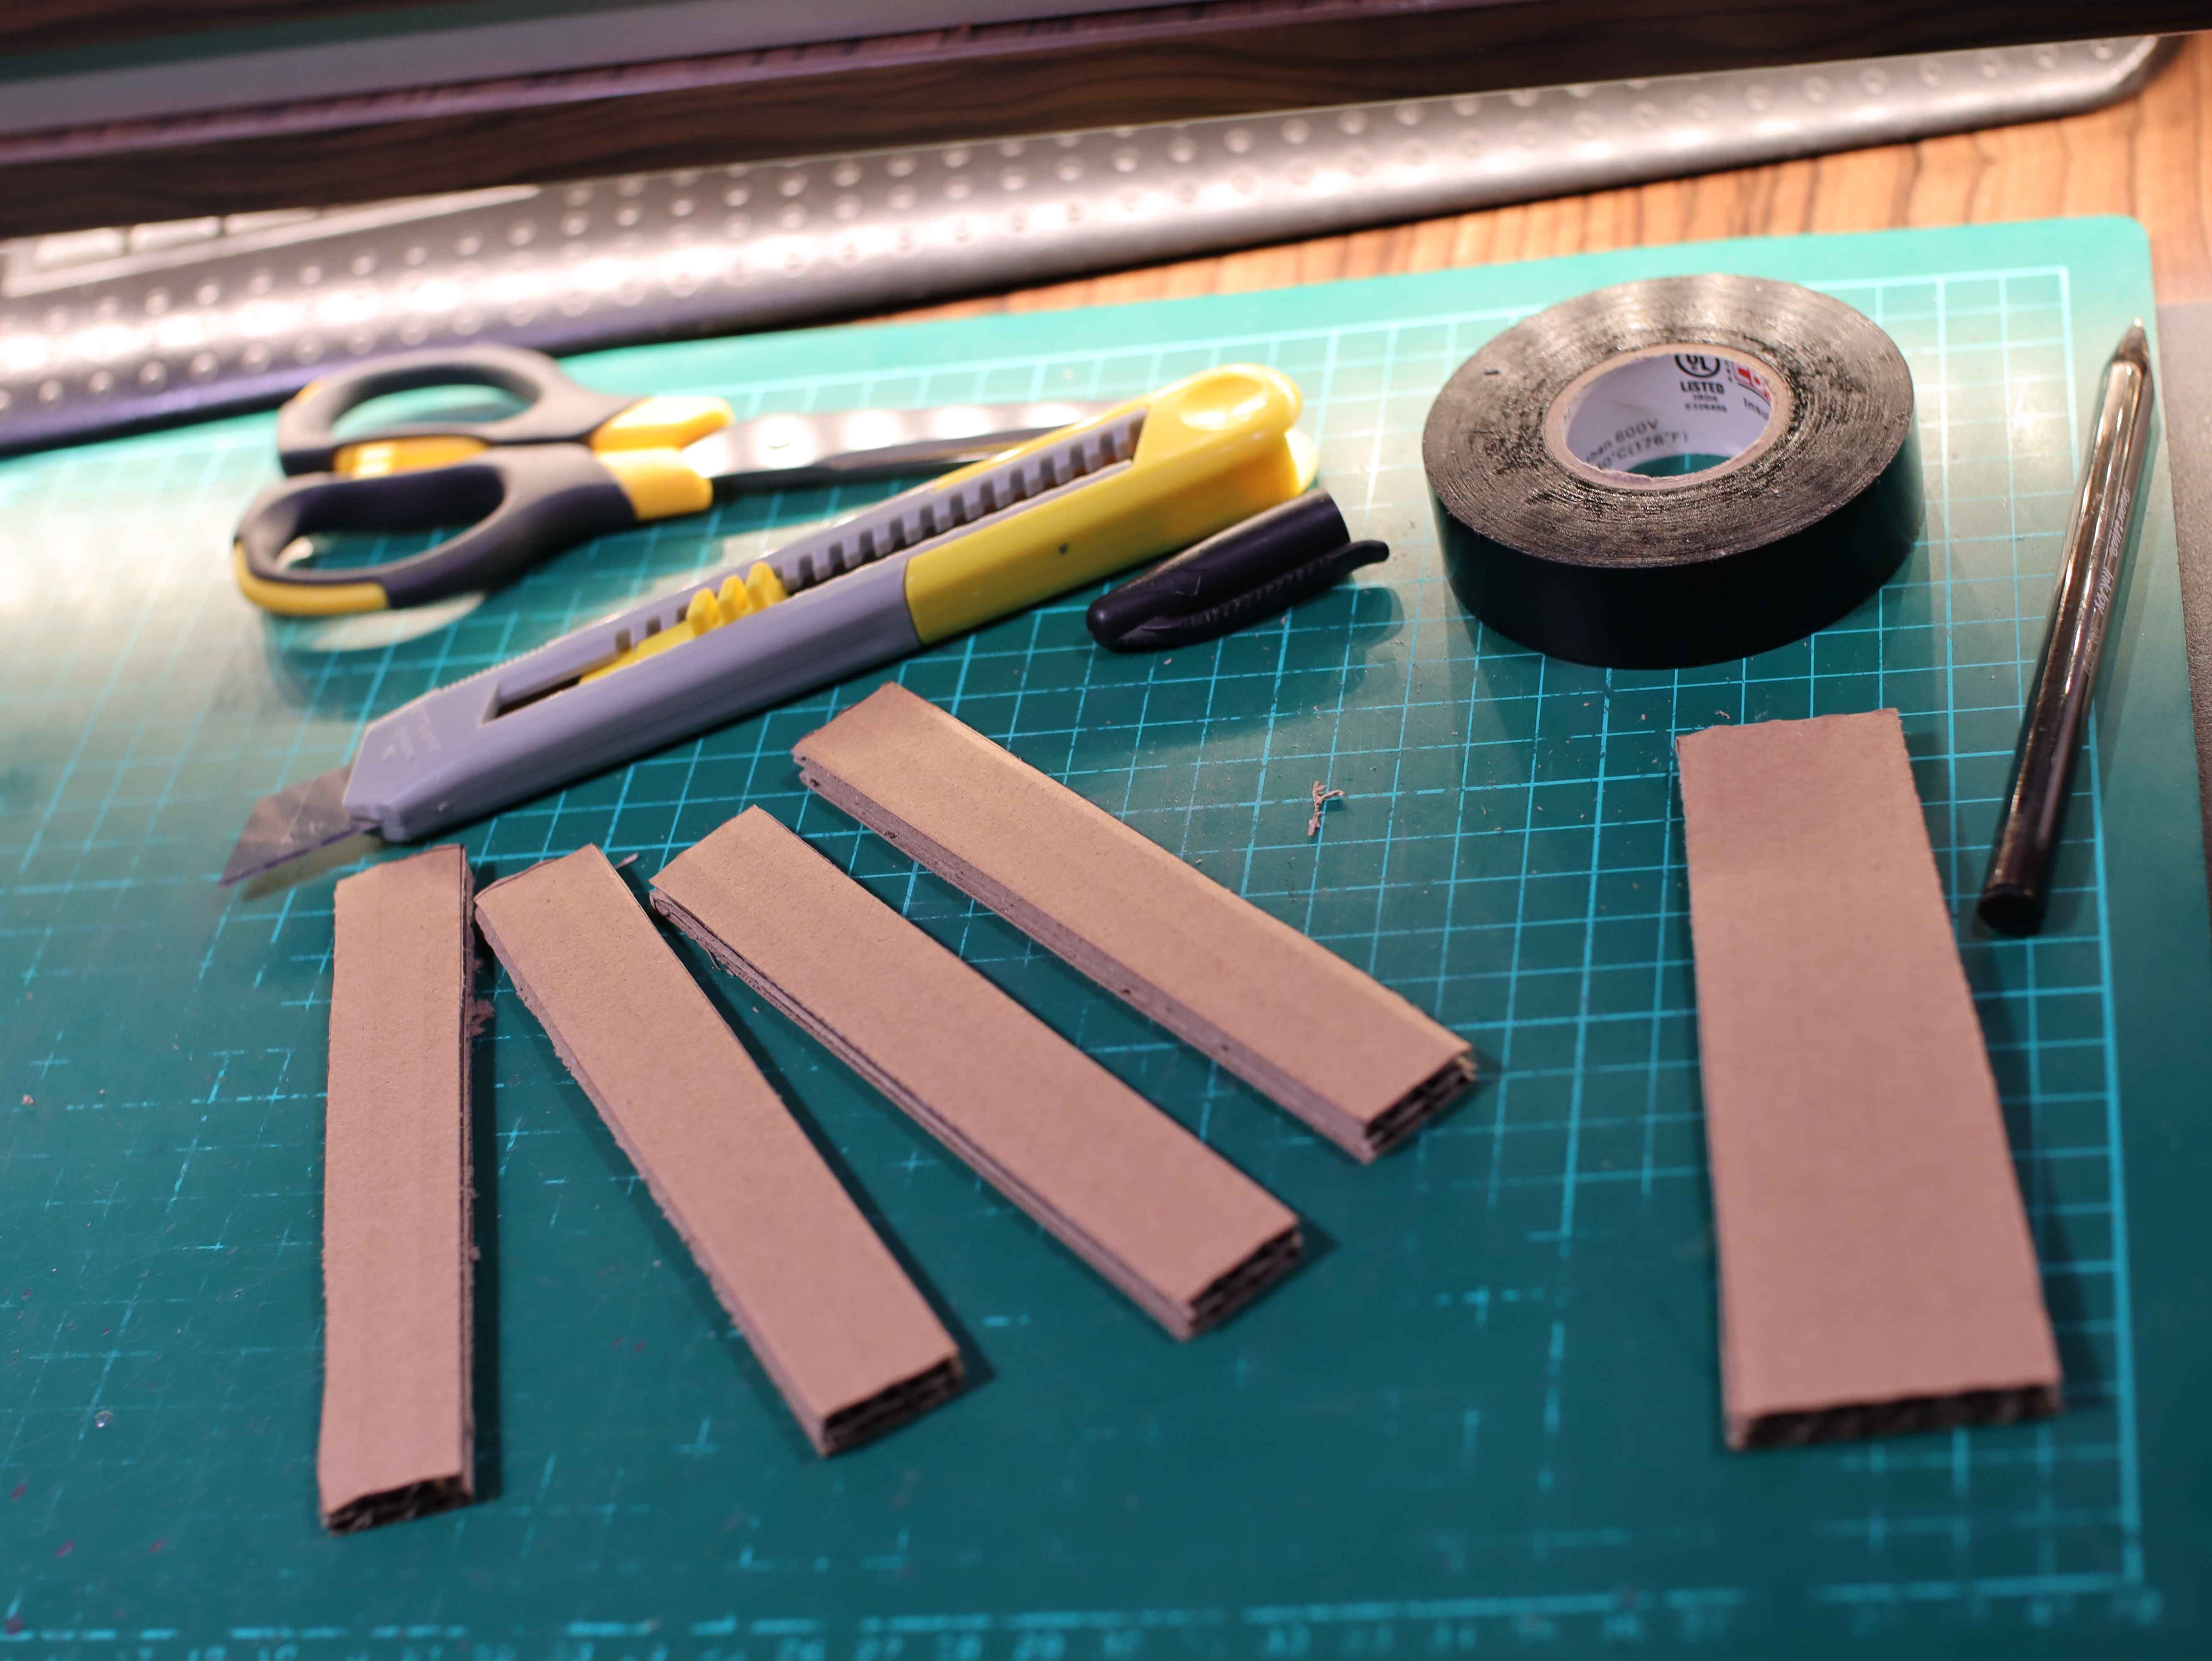 Airsoft battery elements cut out of cardboard. The knife, scissors, pen, electrical tape are on the green service mat.